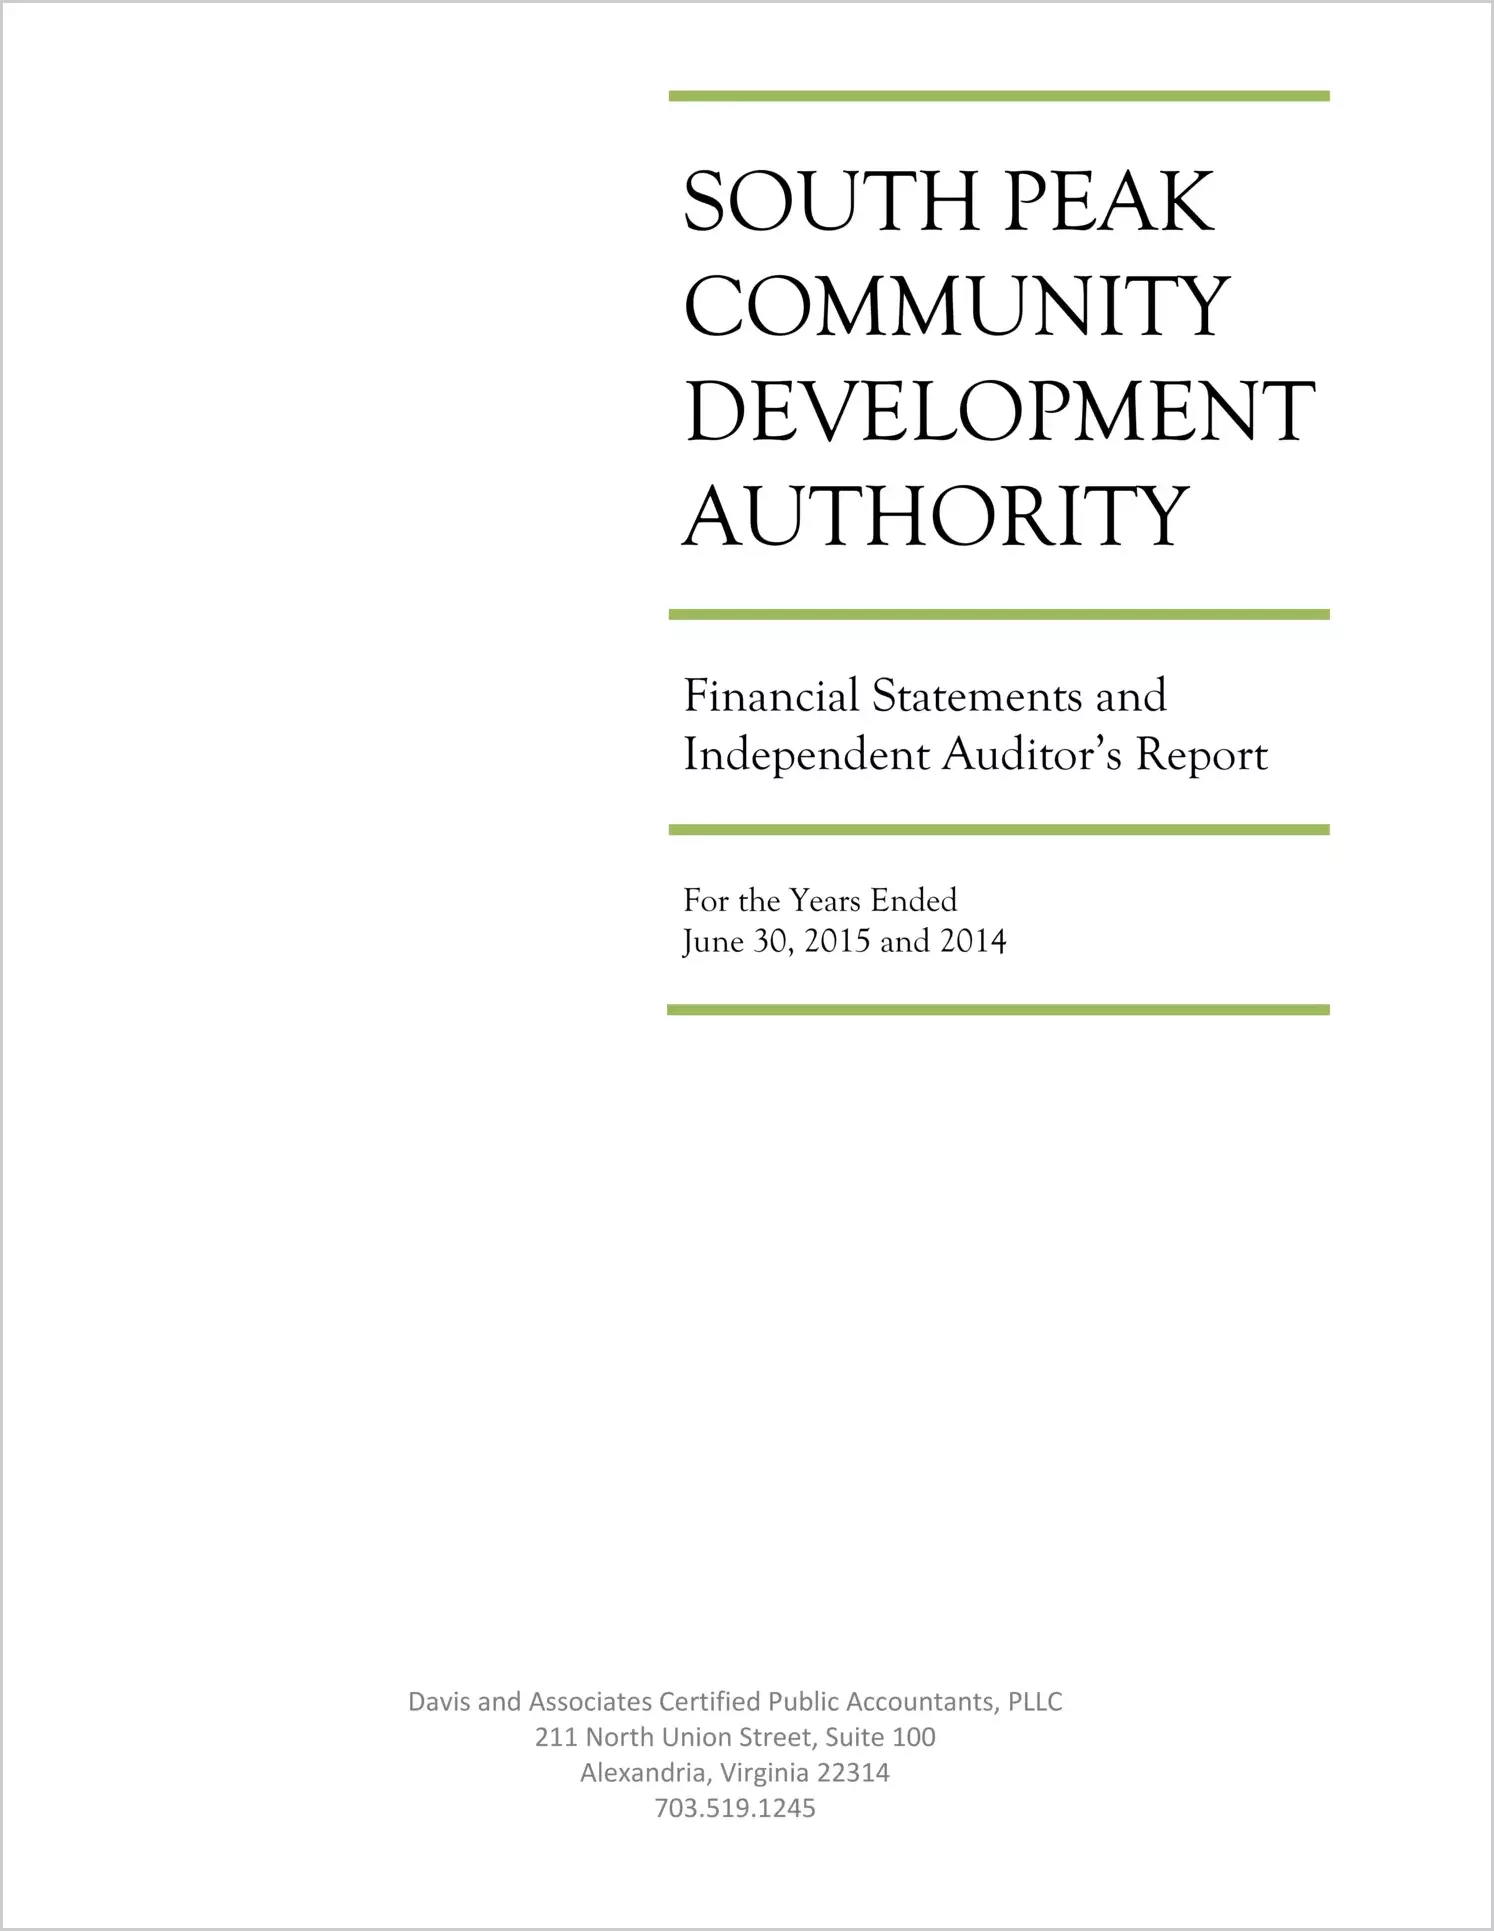 2015 ABC/Other Annual Financial Report  for South Peak Community Development Authority